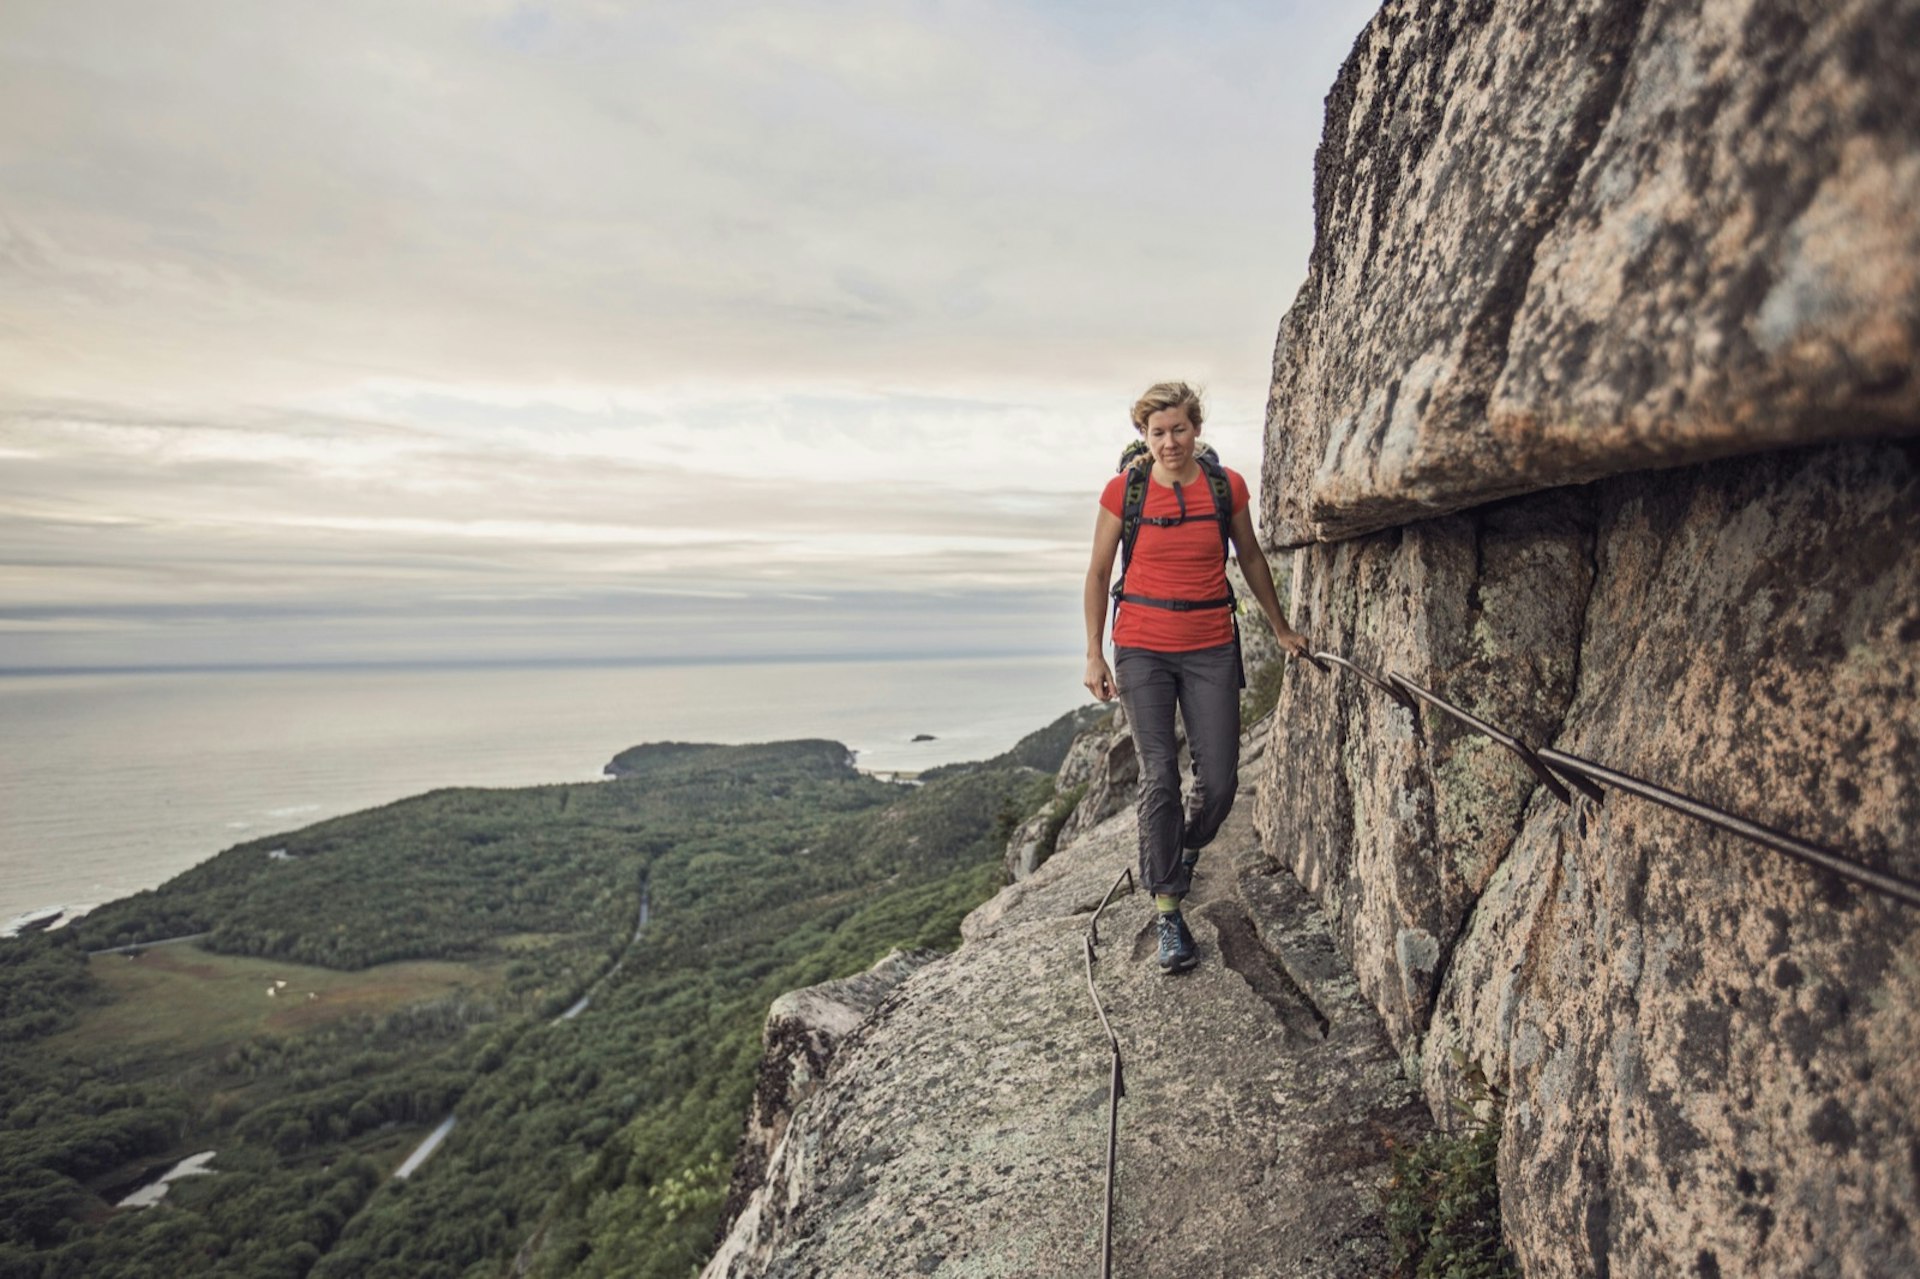 A woman hikes along the cliff edge in Maine's Acadia National Park